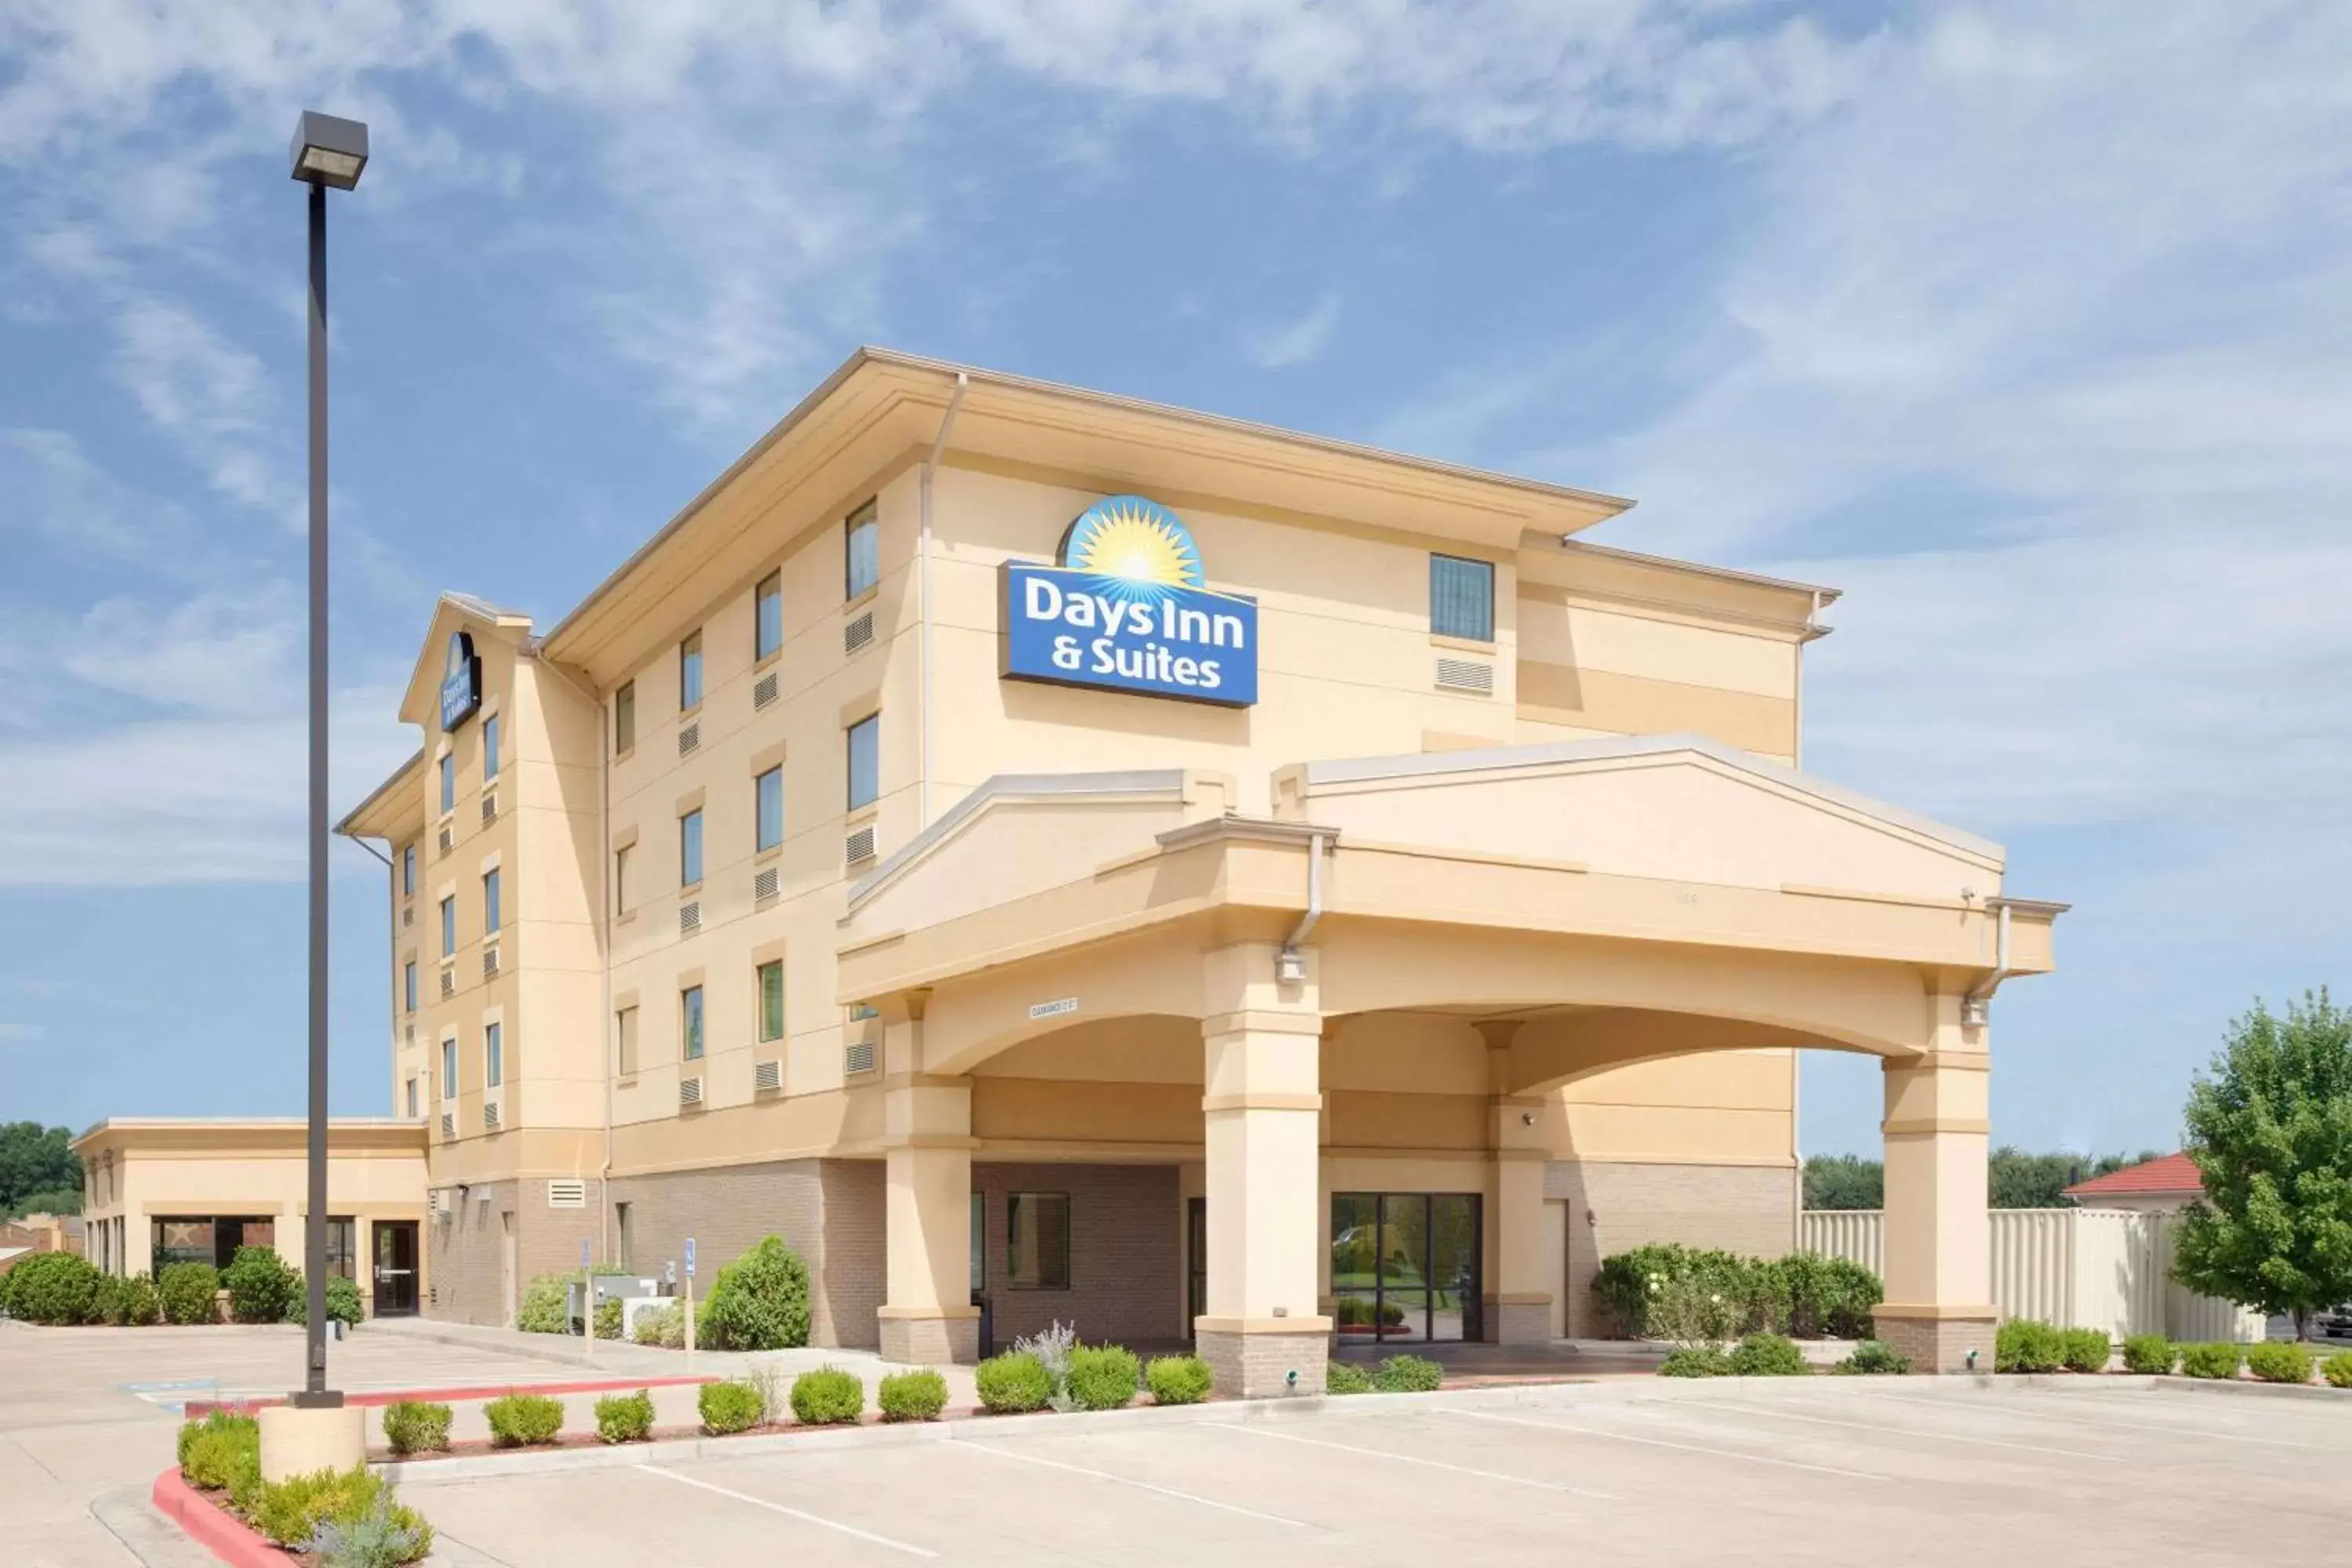 Property Building in Days Inn & Suites by Wyndham Russellville